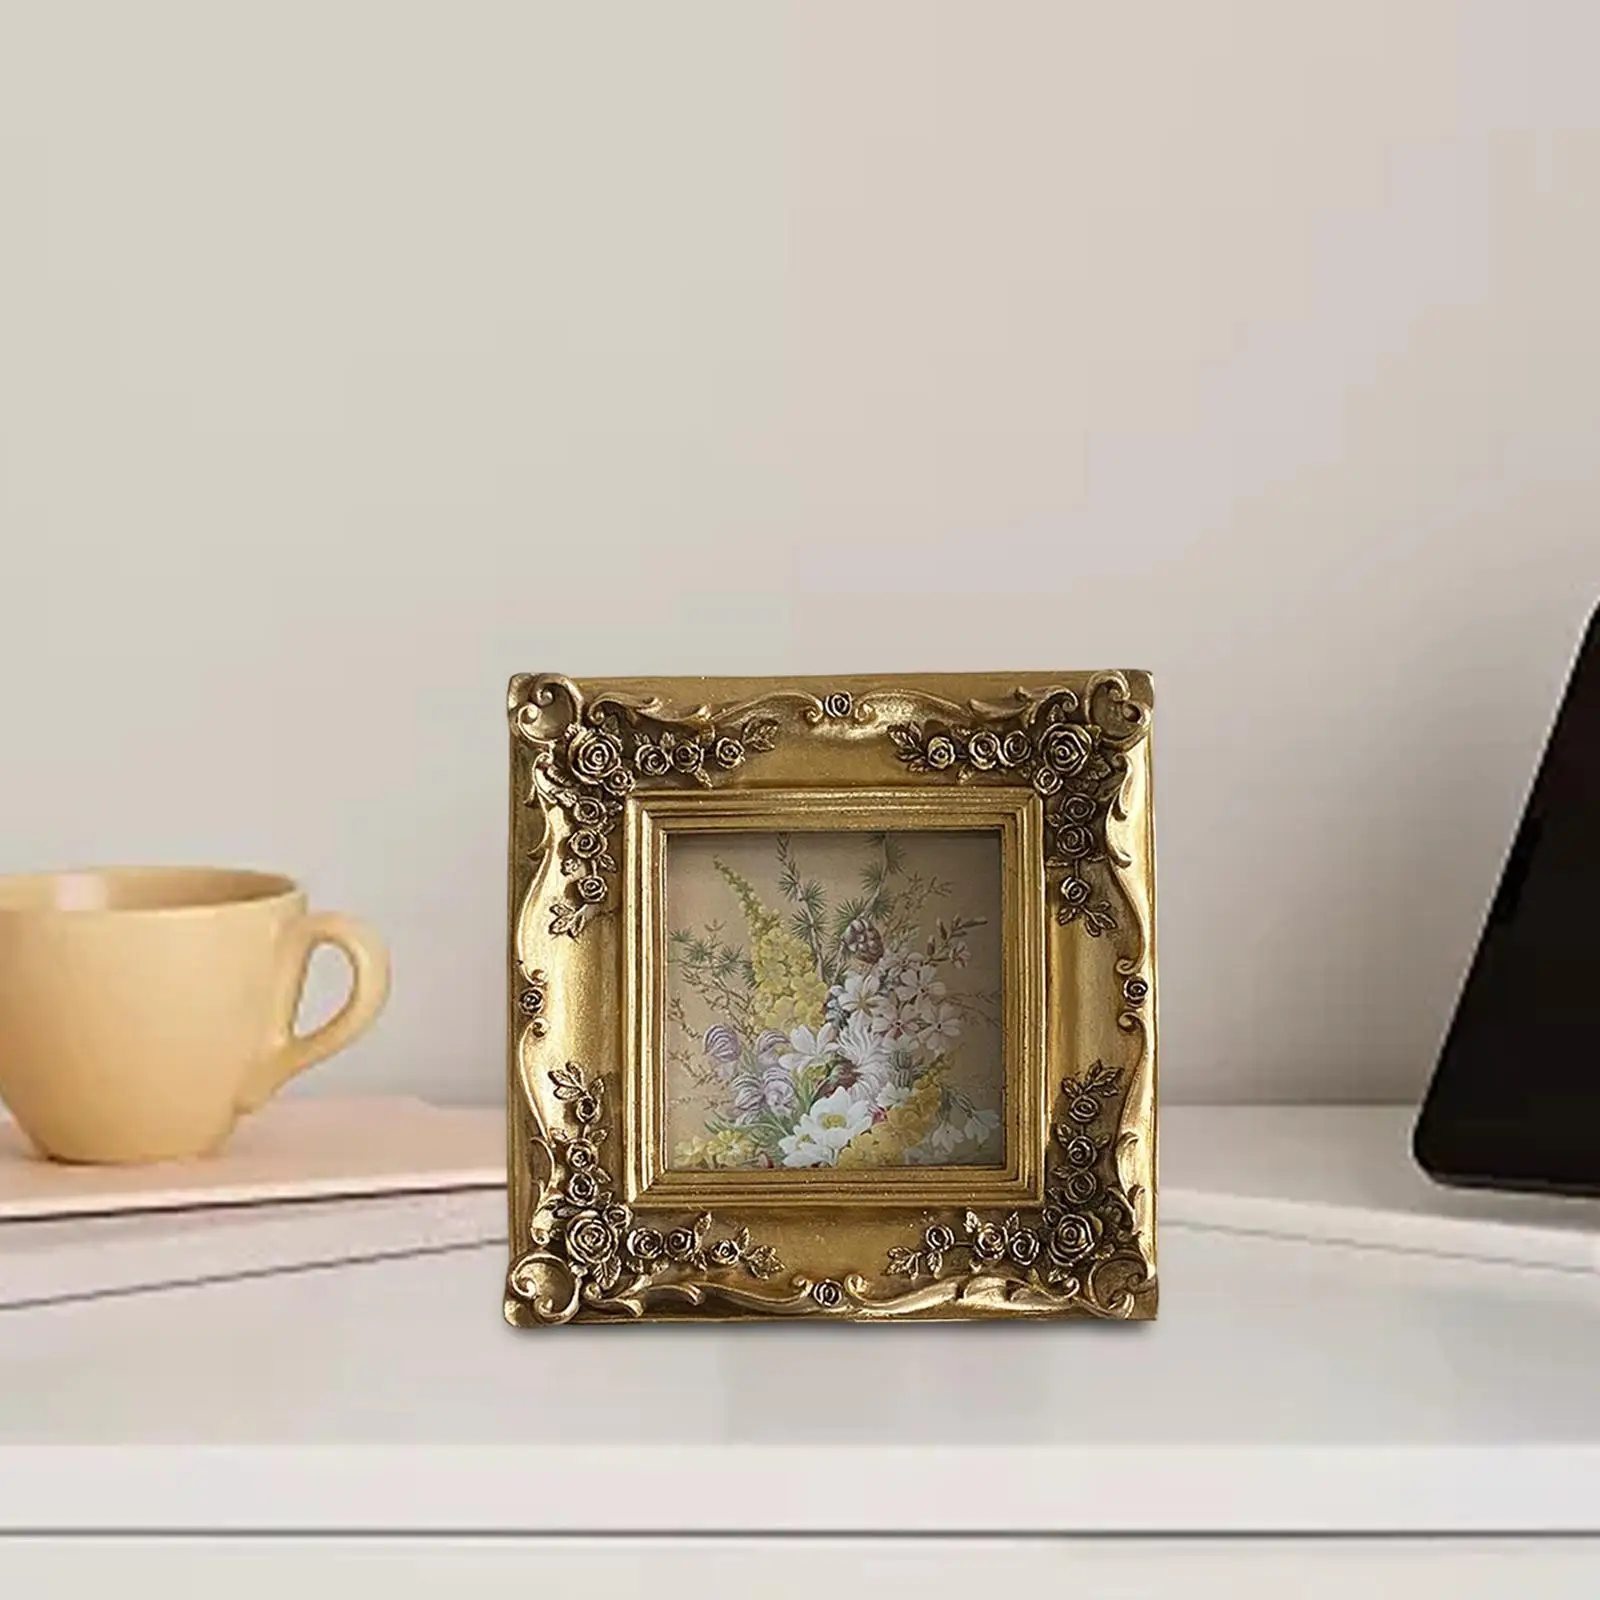 Resin 4x4 Square Photo Frame Desktop and Wall Hanging Painting Frame Photo Holder Decorative Picture Frame for Home Table Decor